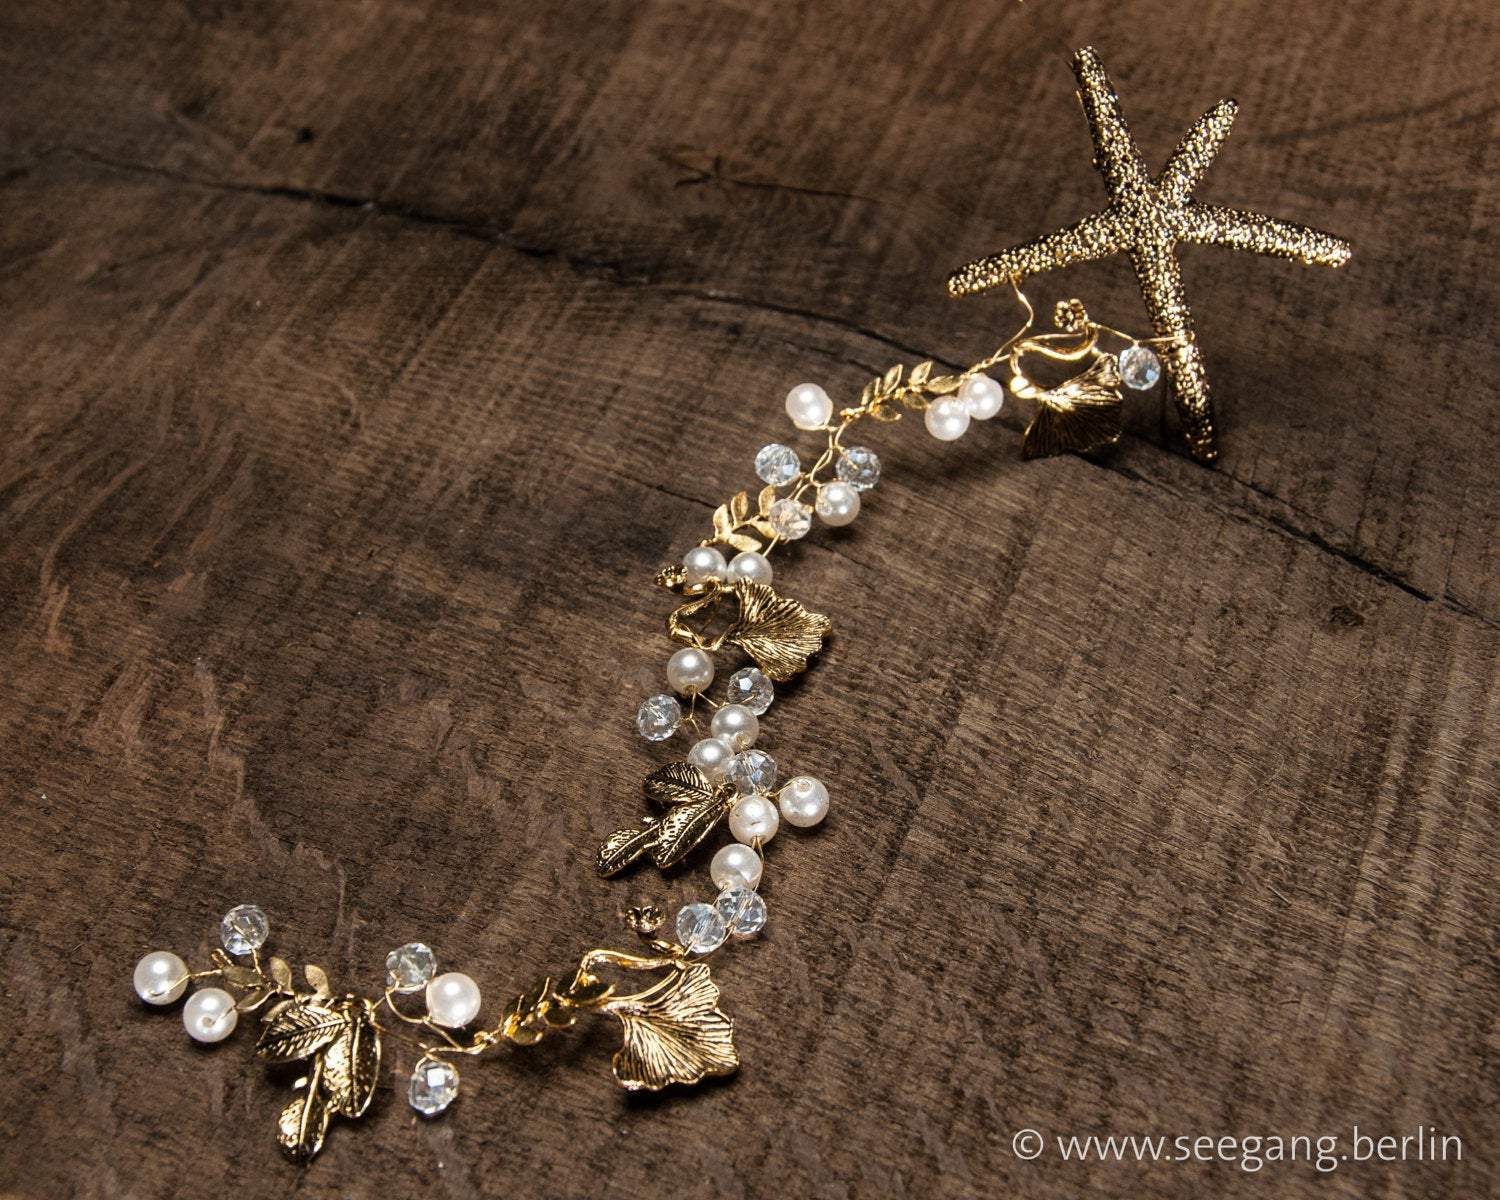 HAIRBAND - BRIDAL JEWELLERY FOR YOUR WEDDING BY THE SEA © Seegang Berlin